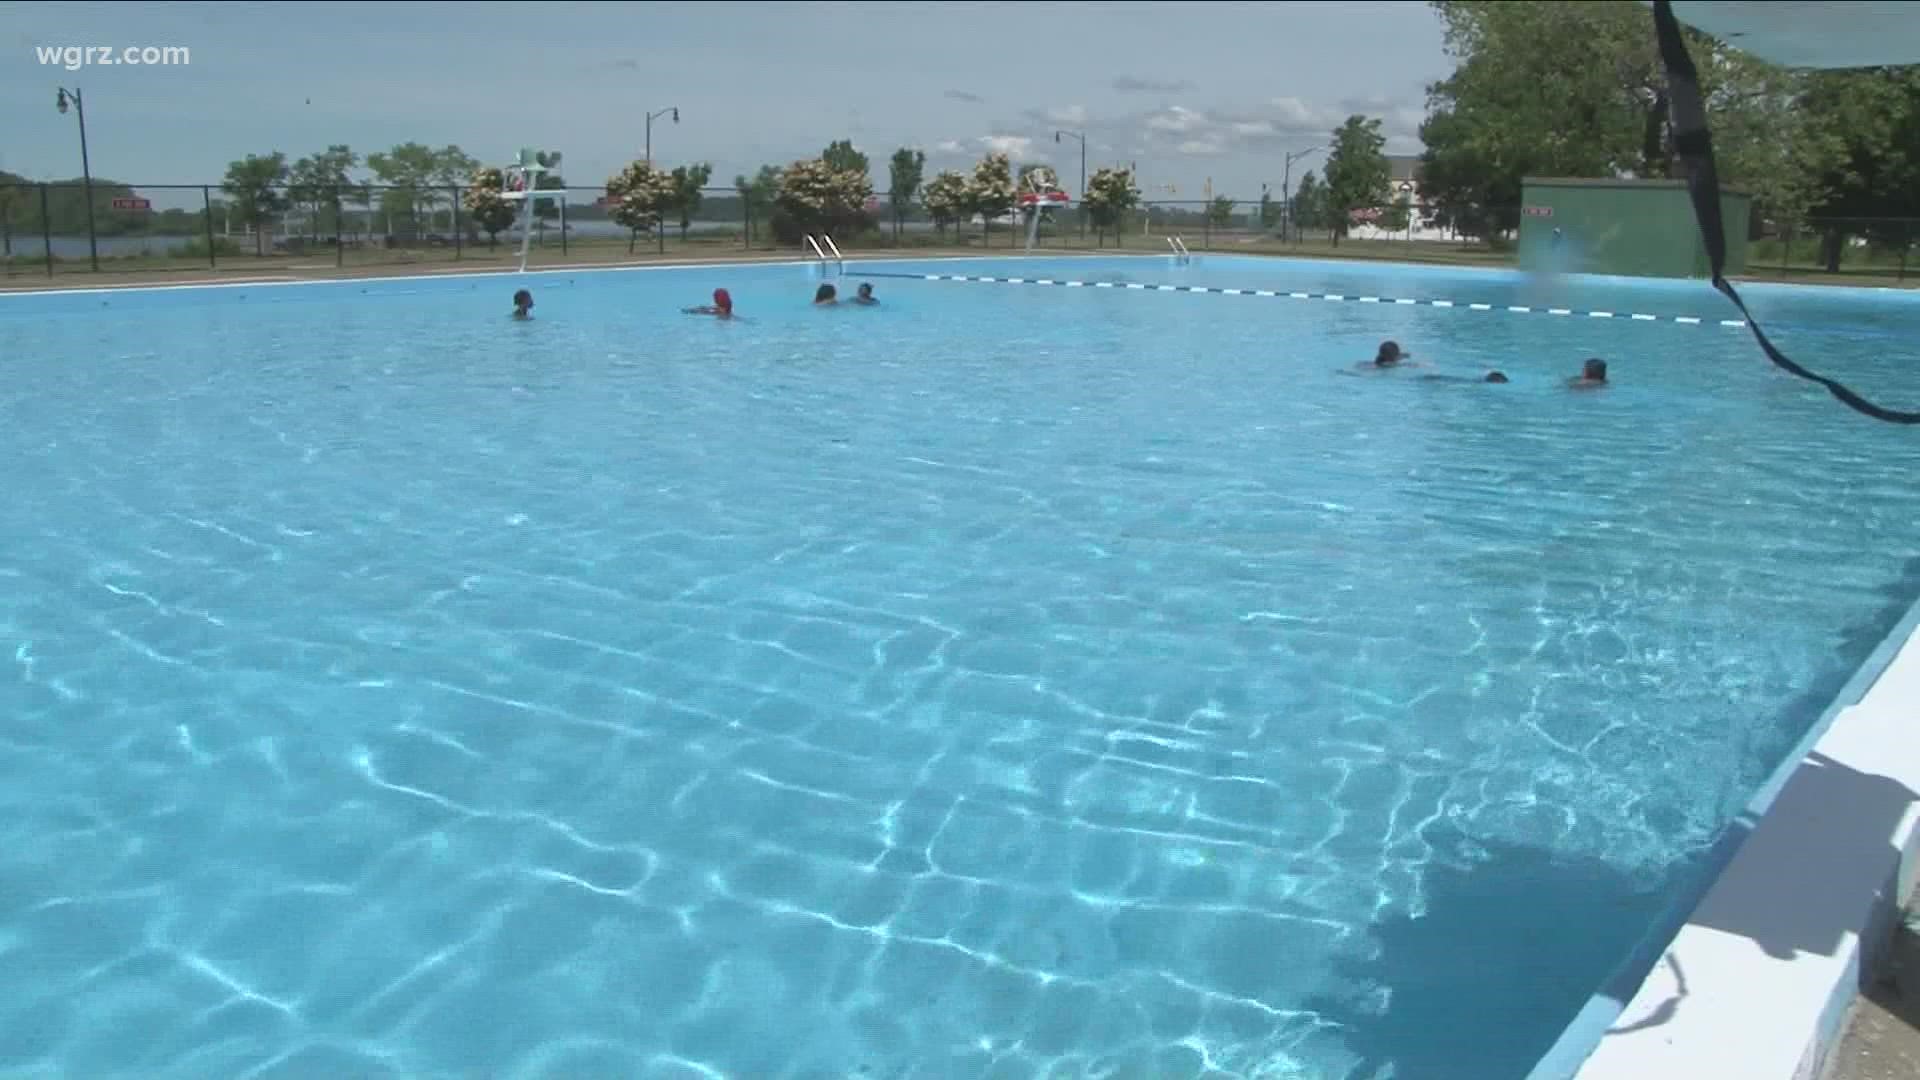 The City of Buffalo will not open their outdoor pools this summer. We're learning other towns across the region are also closing their pools.